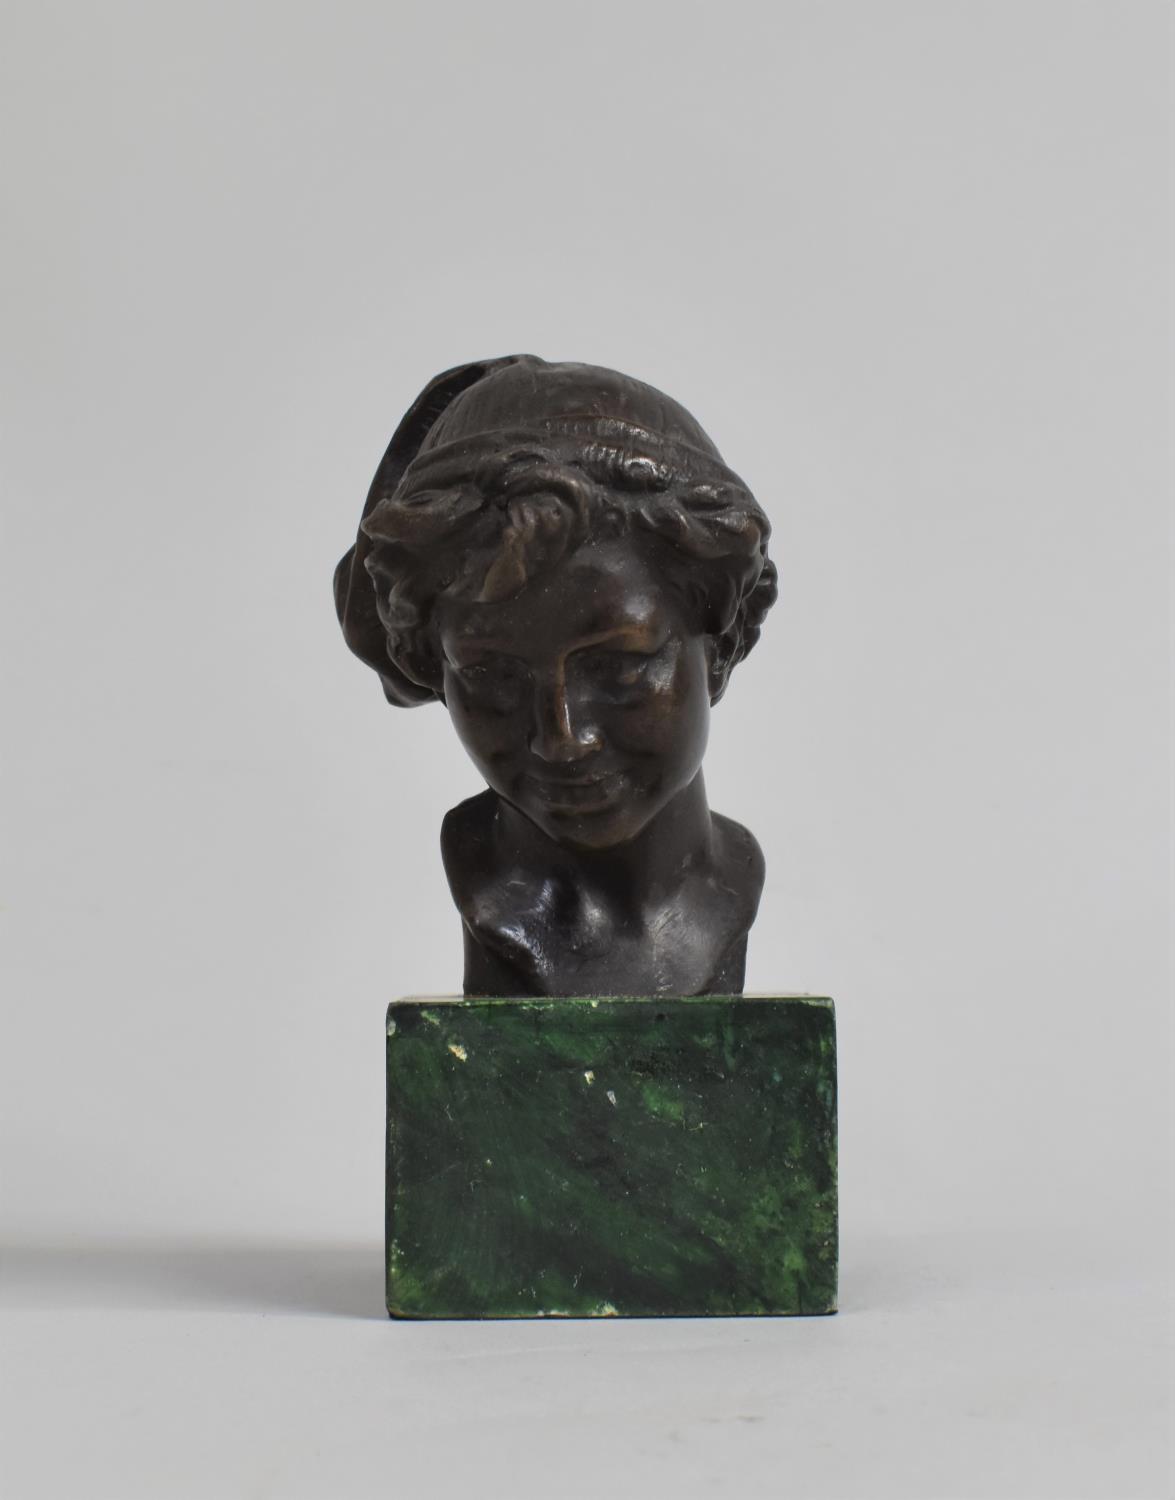 A Reproduction Bronze Bust of Peter Pan on Marble Plinth, 12cm high - Image 2 of 2